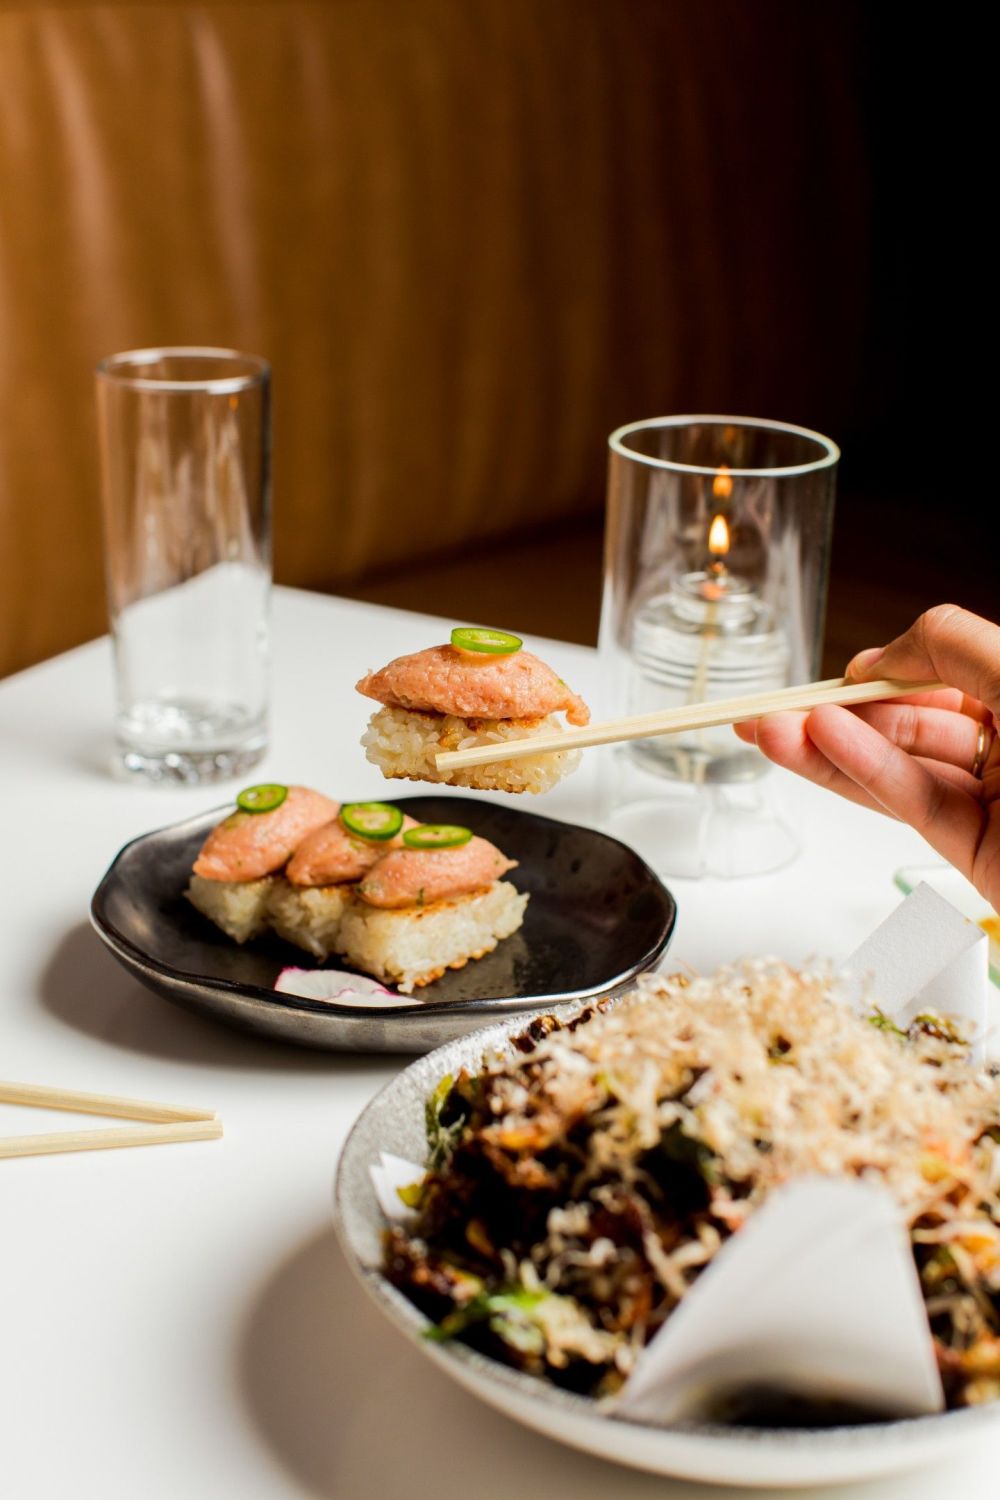 With specialty cocktails, unique rolls, and spectacular sushi and sashimi platters, Chef Uechi skillfully translates Japanese flavors for the American palate.